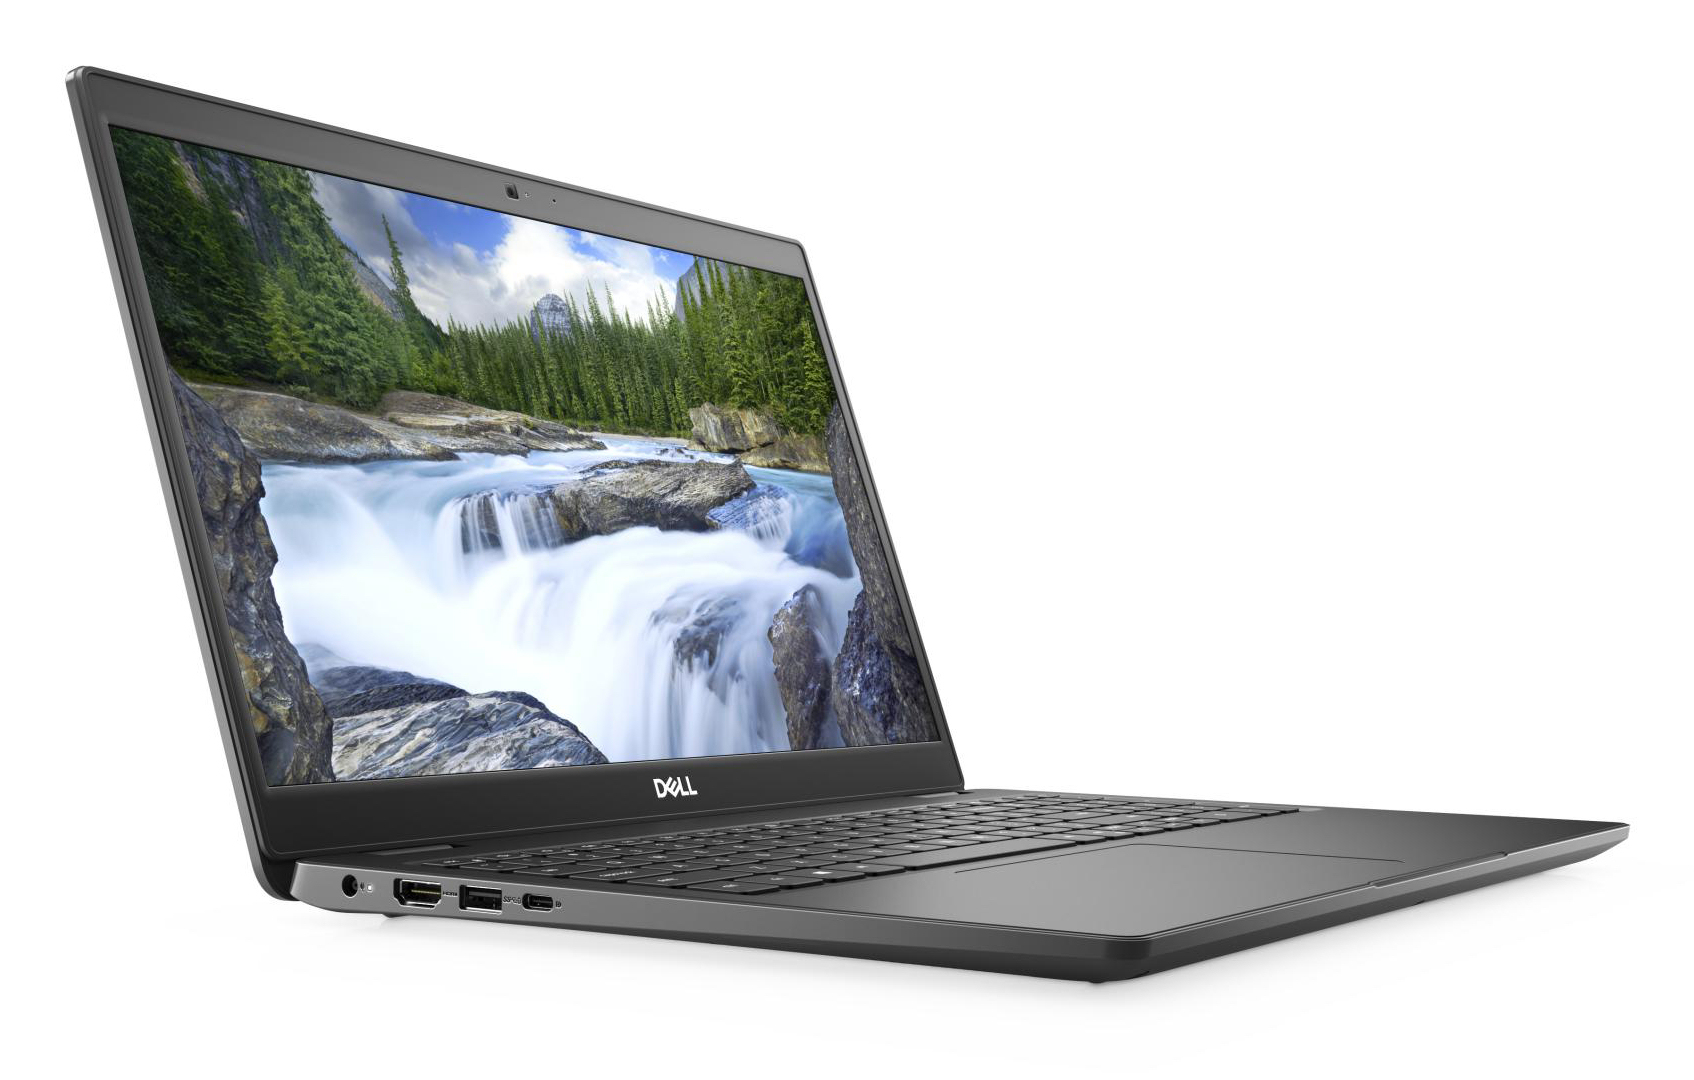 Dell Latitude 3510 Review: Good Battery Life Despite Small Battery -   Reviews